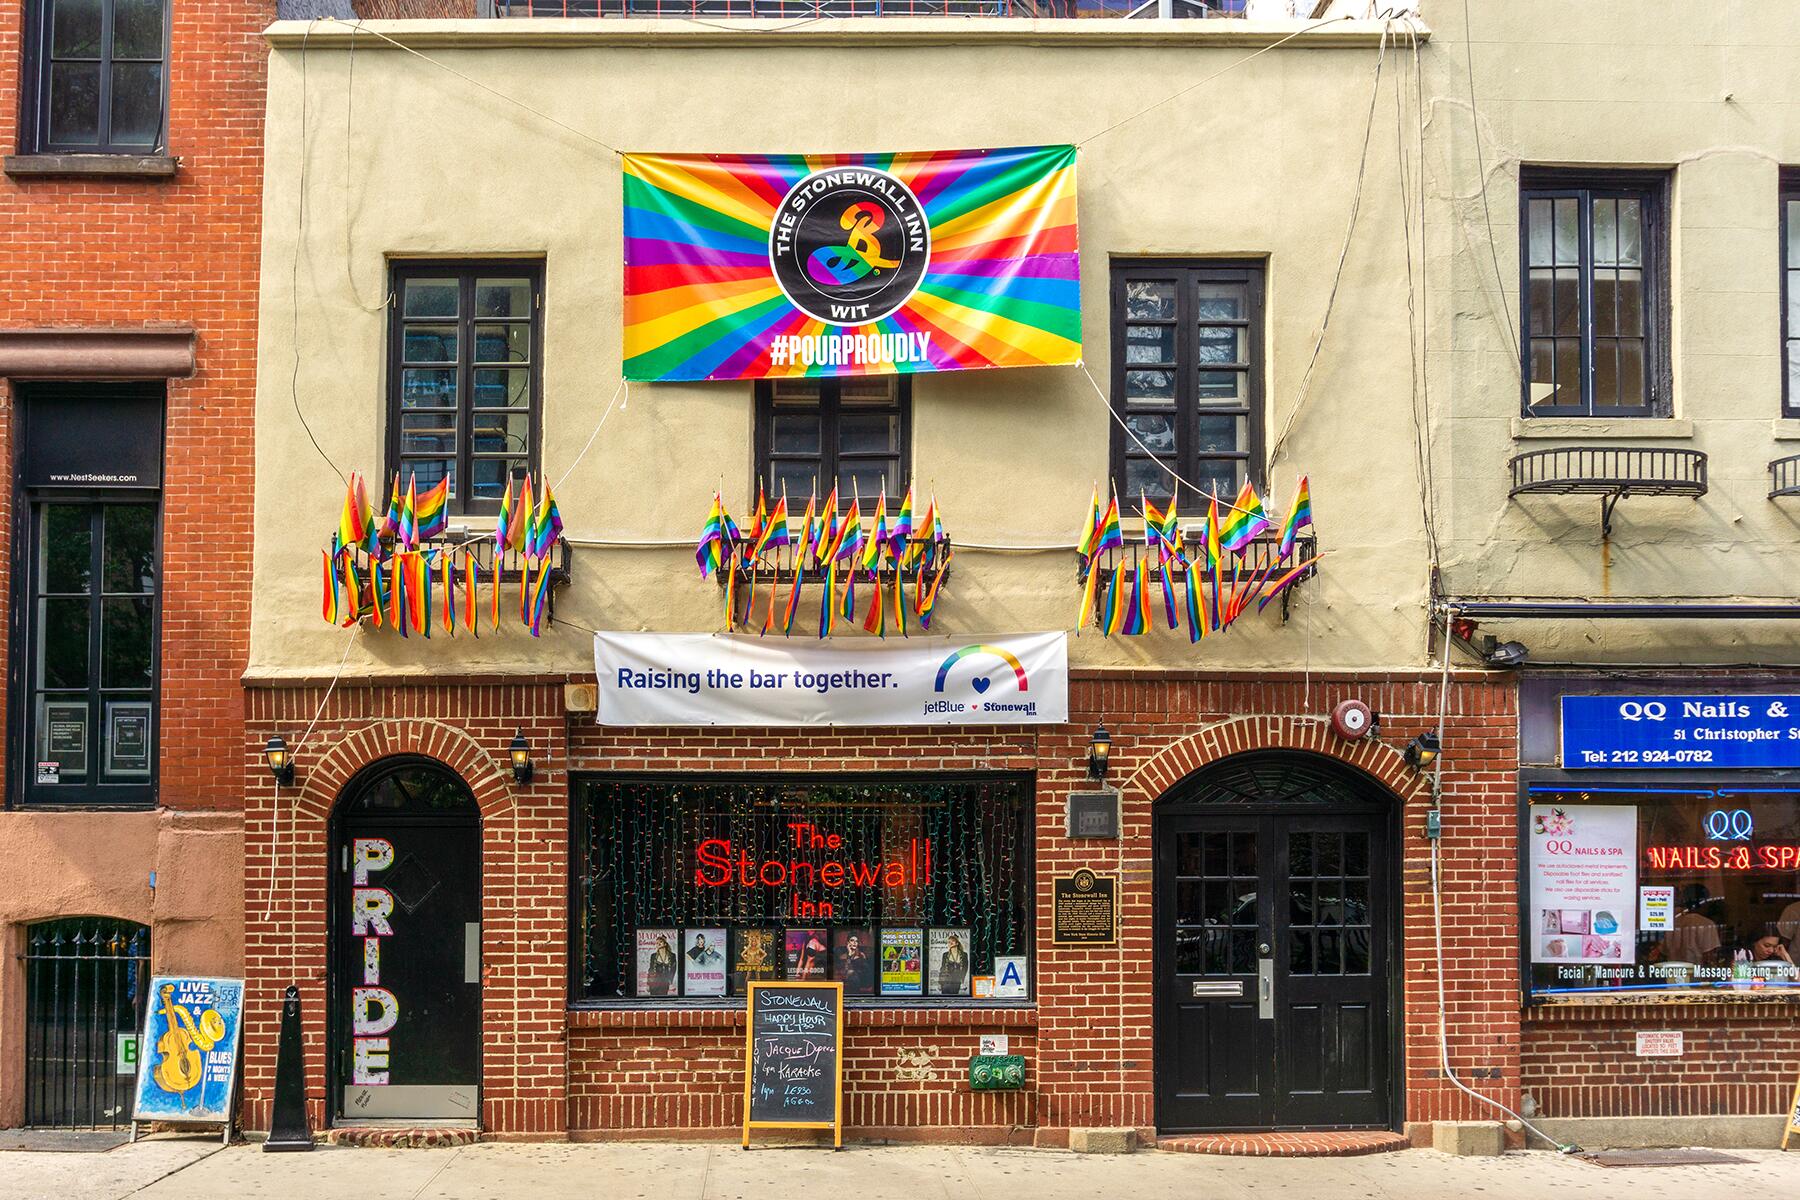 <a href='https://www.fodors.com/world/north-america/usa/new-york/new-york-city/experiences/news/photos/a-queer-guide-to-visiting-new-york-city#'>From &quot;The Ultimate LGBTQ+ Guide to Visiting New York City: The Stonewall Inn&quot;</a>